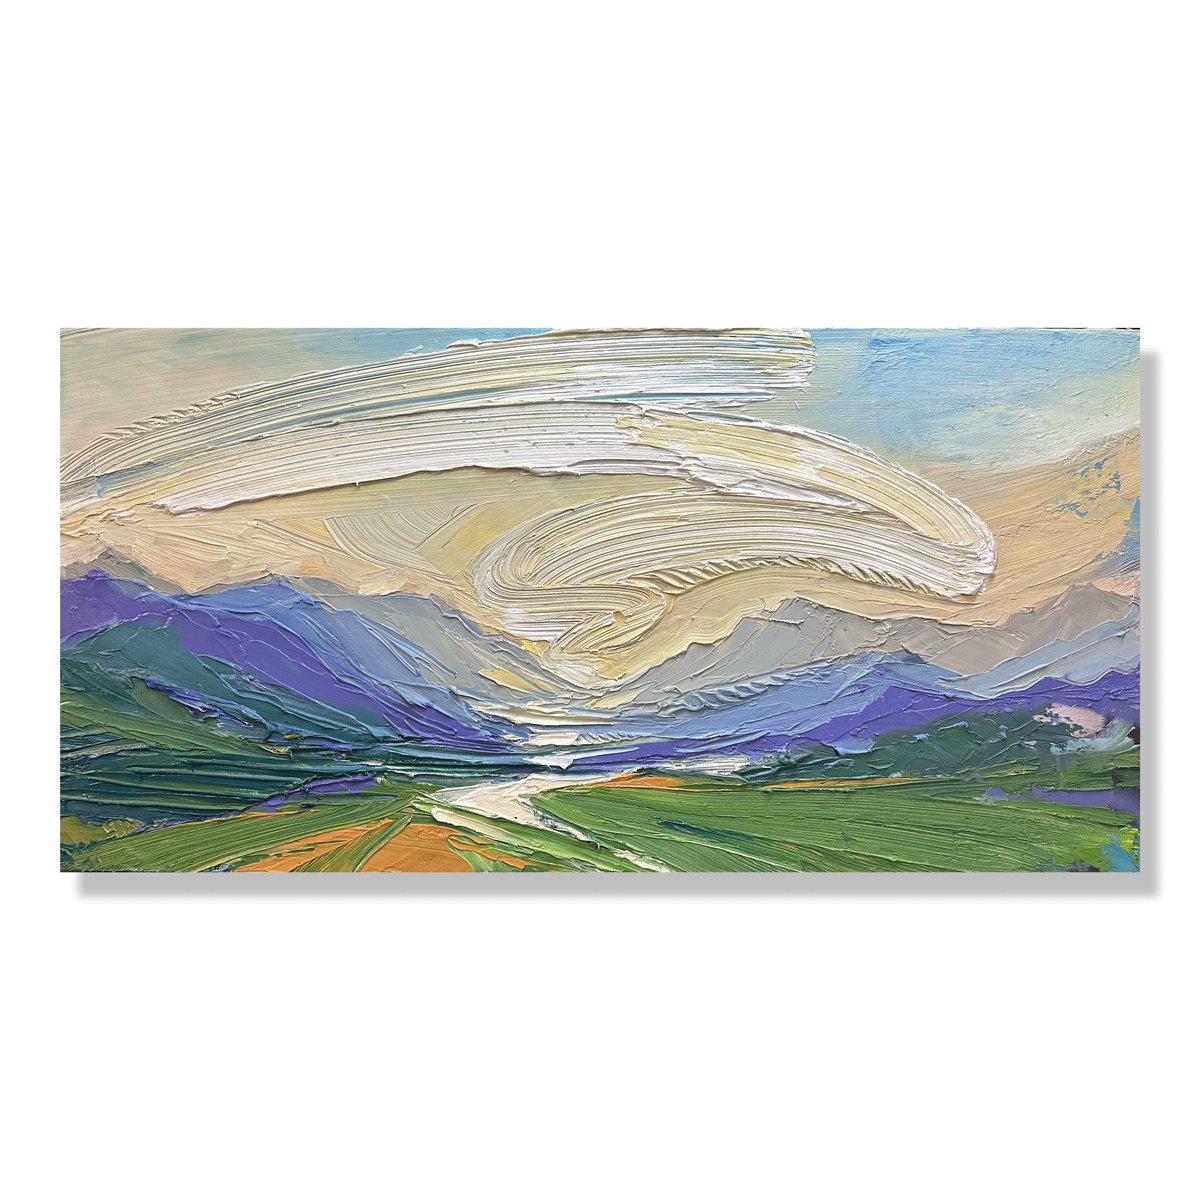 Working on a few more “traditional” landscapes this week and I am enjoying these simple color palettes! Acrylic on panel 24” x 48” 🖼️
Available for purchase 

Now I just need a title! #yegart #yegartist #edmontonartist #edmontonpainter #colorado #coloradoart #mountainart